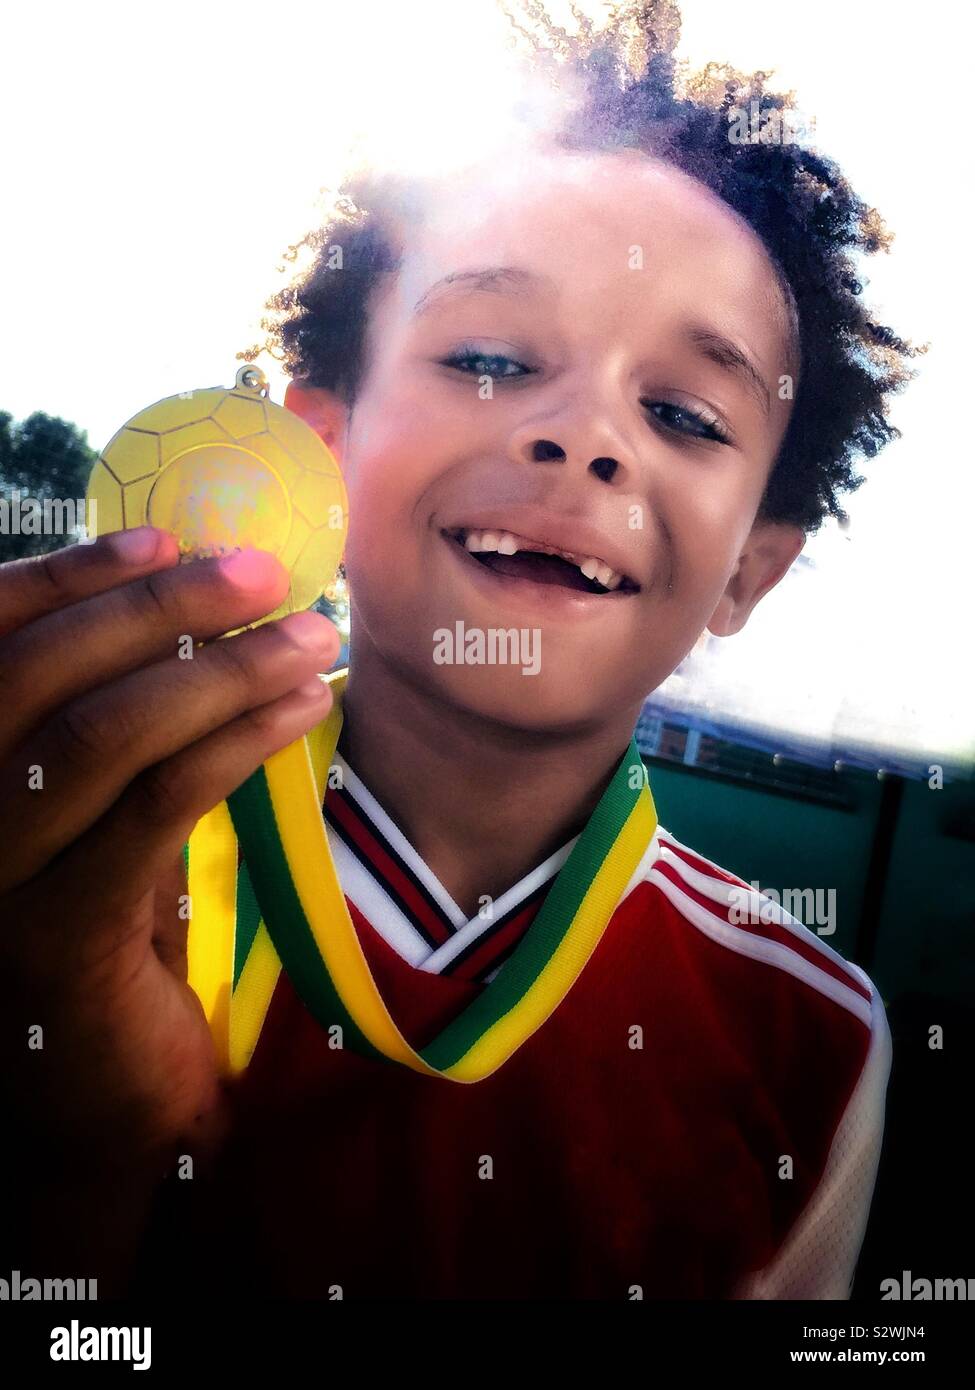 A boy proudly shows off his sports medal. Stock Photo